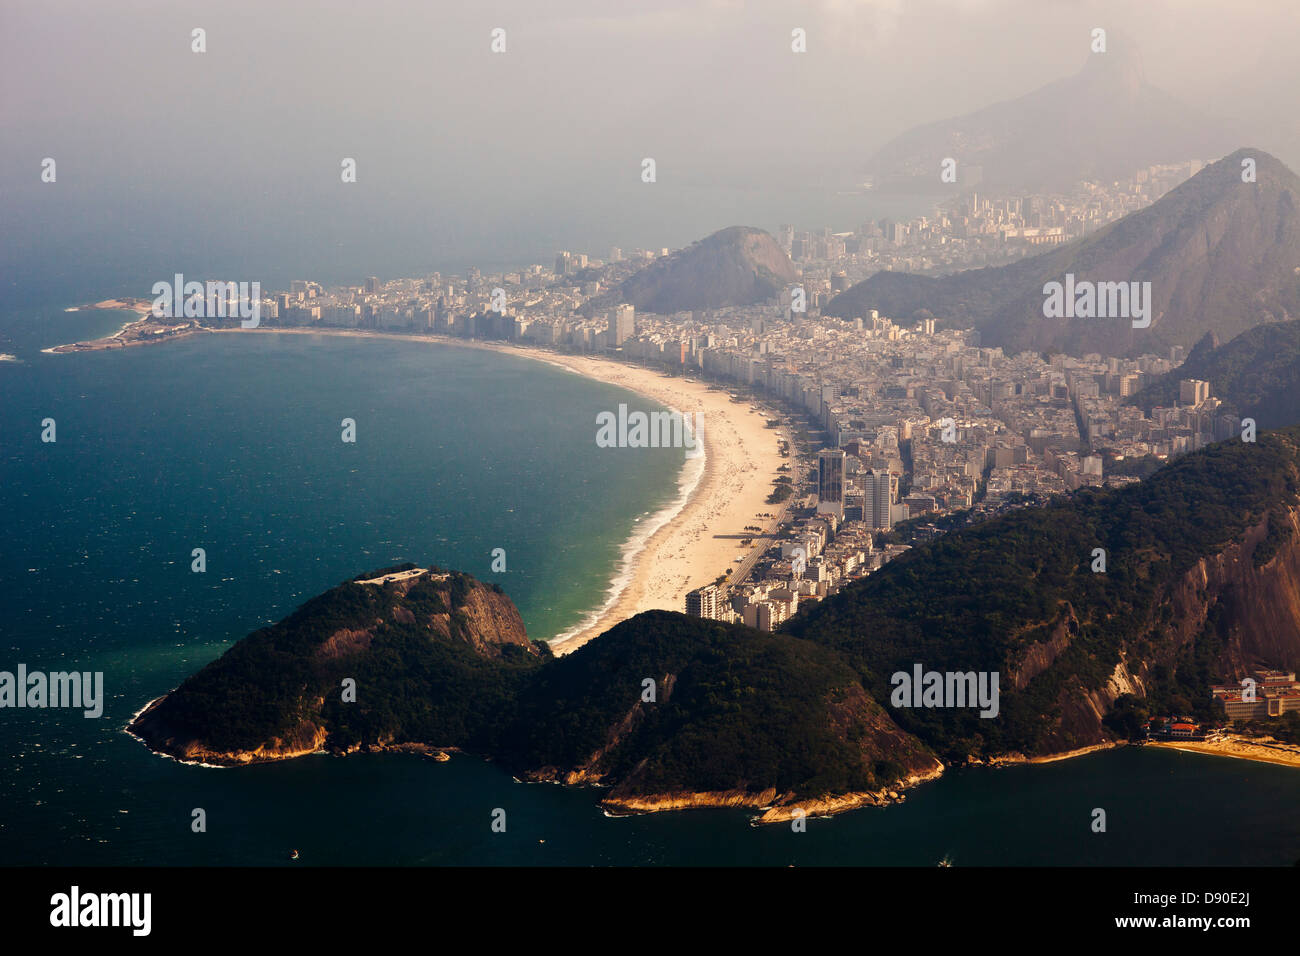 Aerial view of Copacabana beach and neighborhood on a misty morning - high level of humidity in the air. Rio de Janeiro, Brazil. Stock Photo